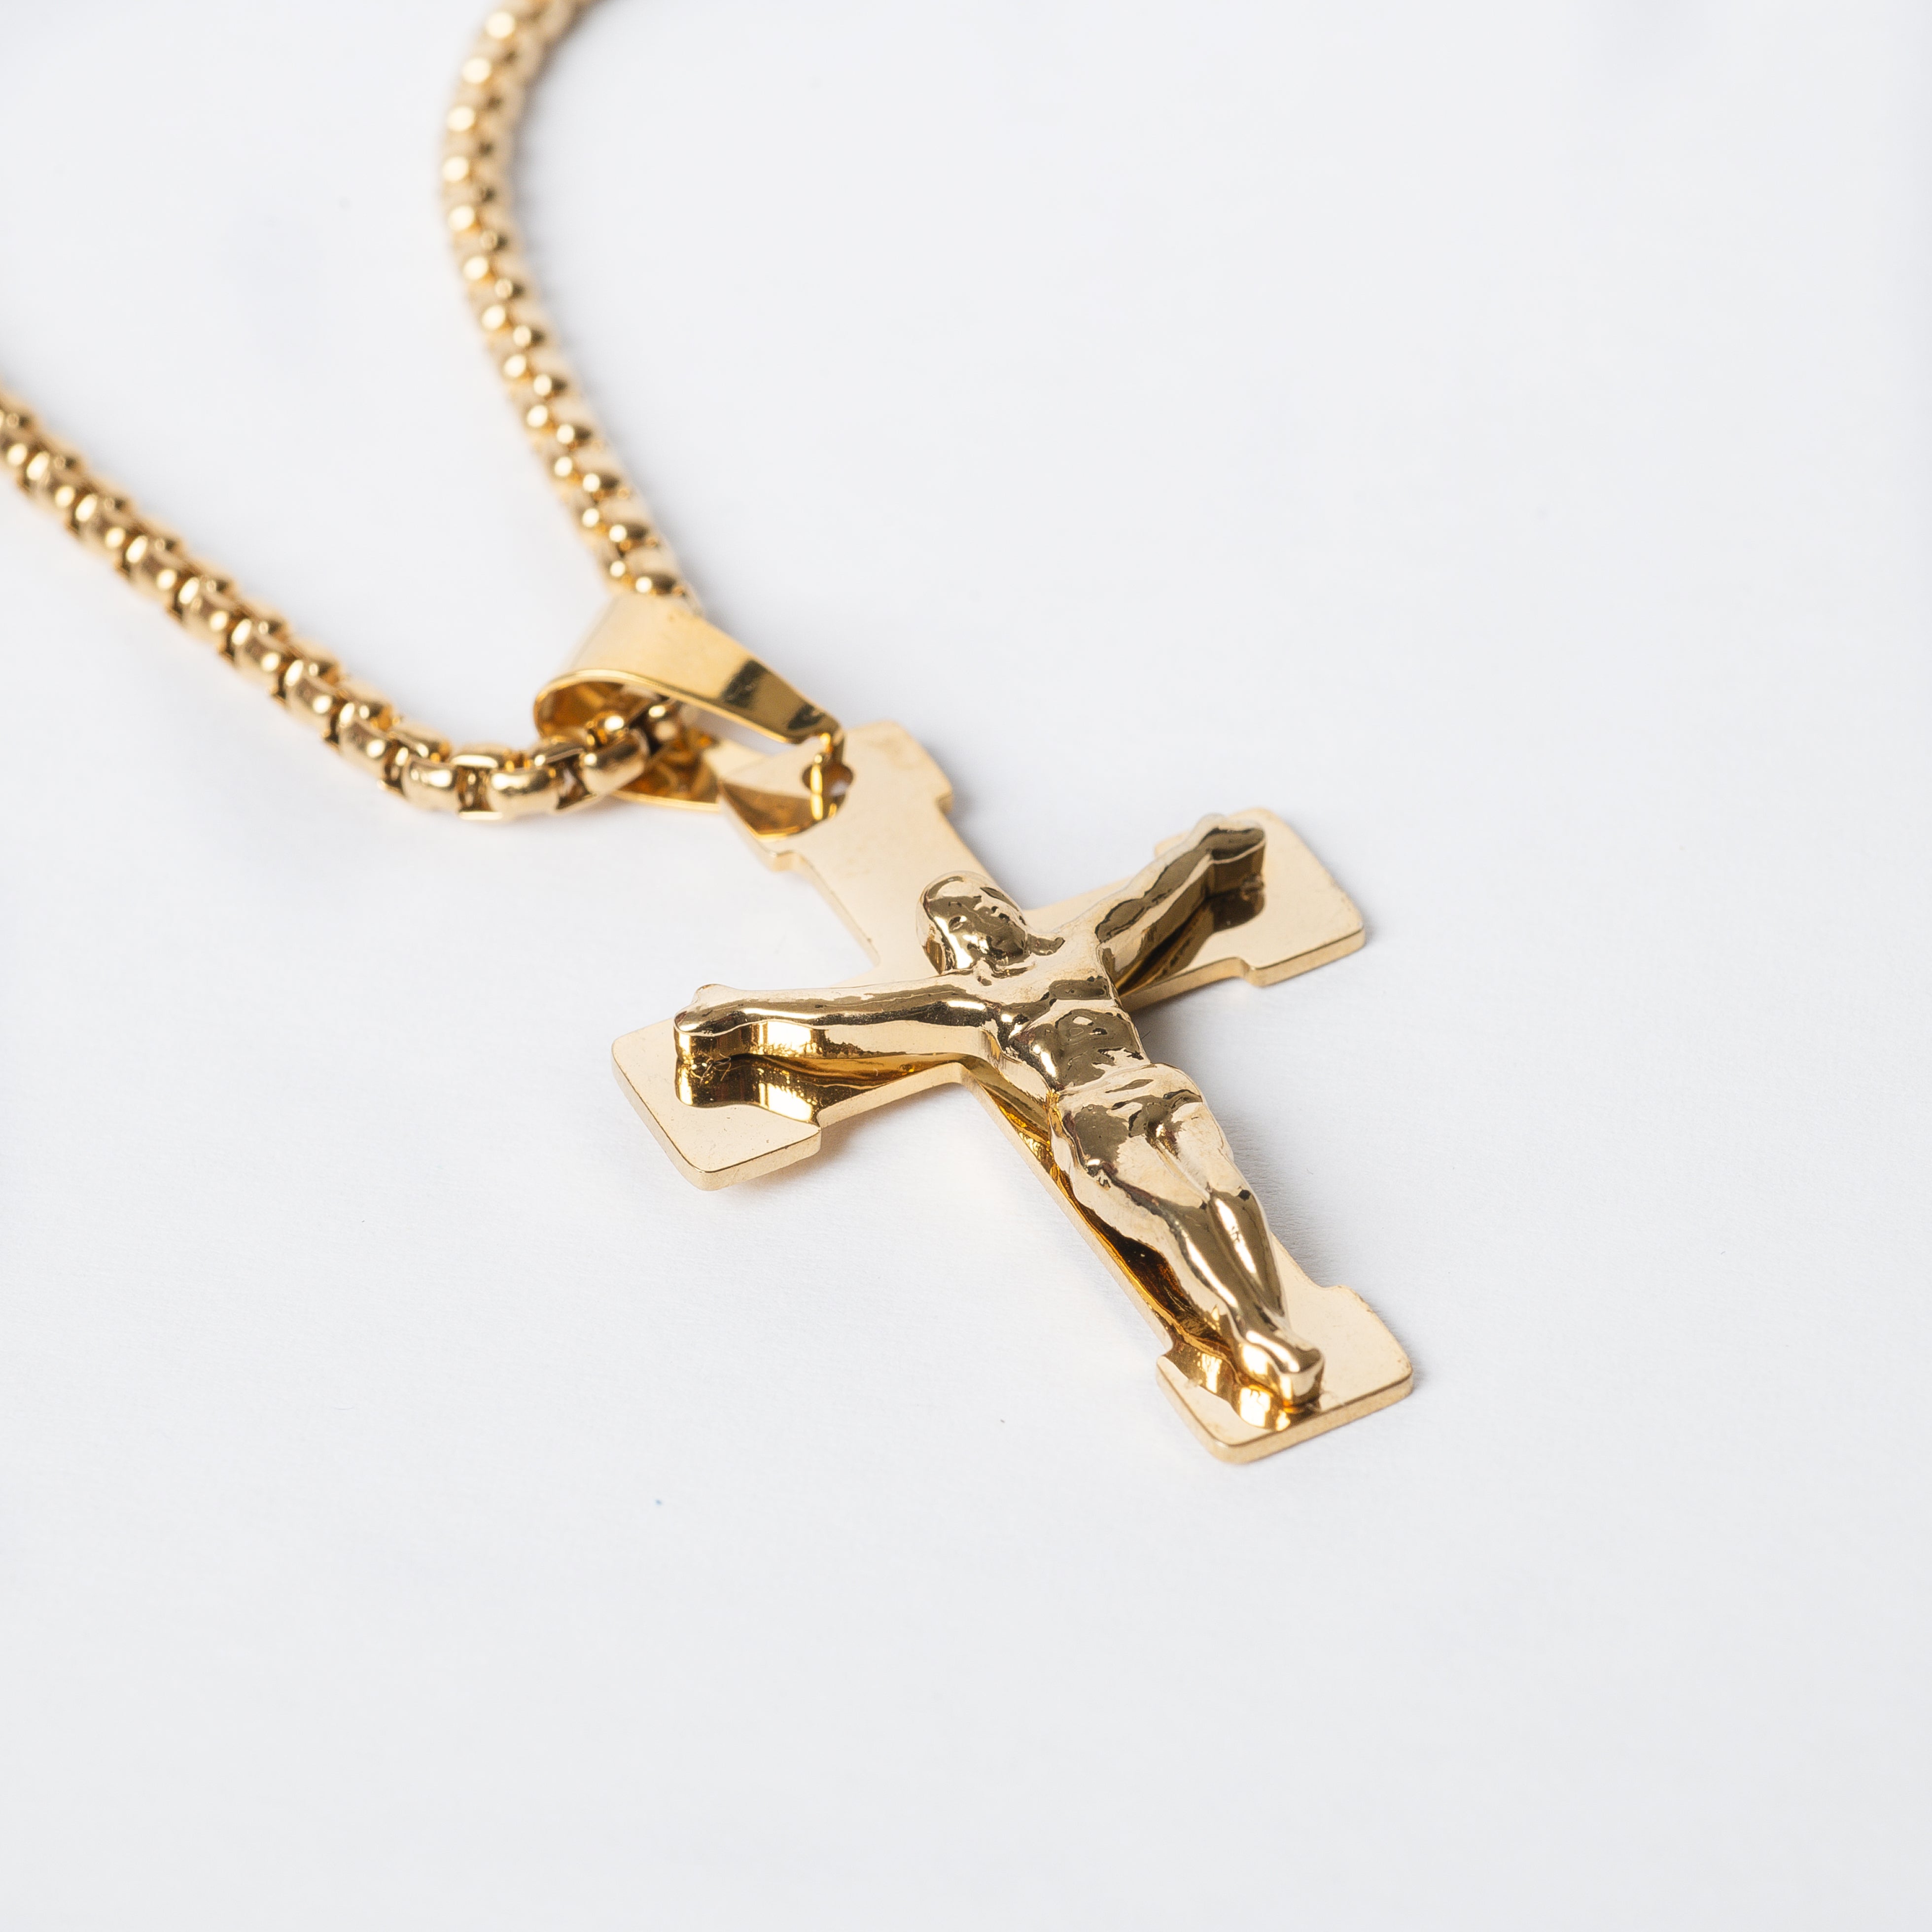 Manly Cross Gold Necklace